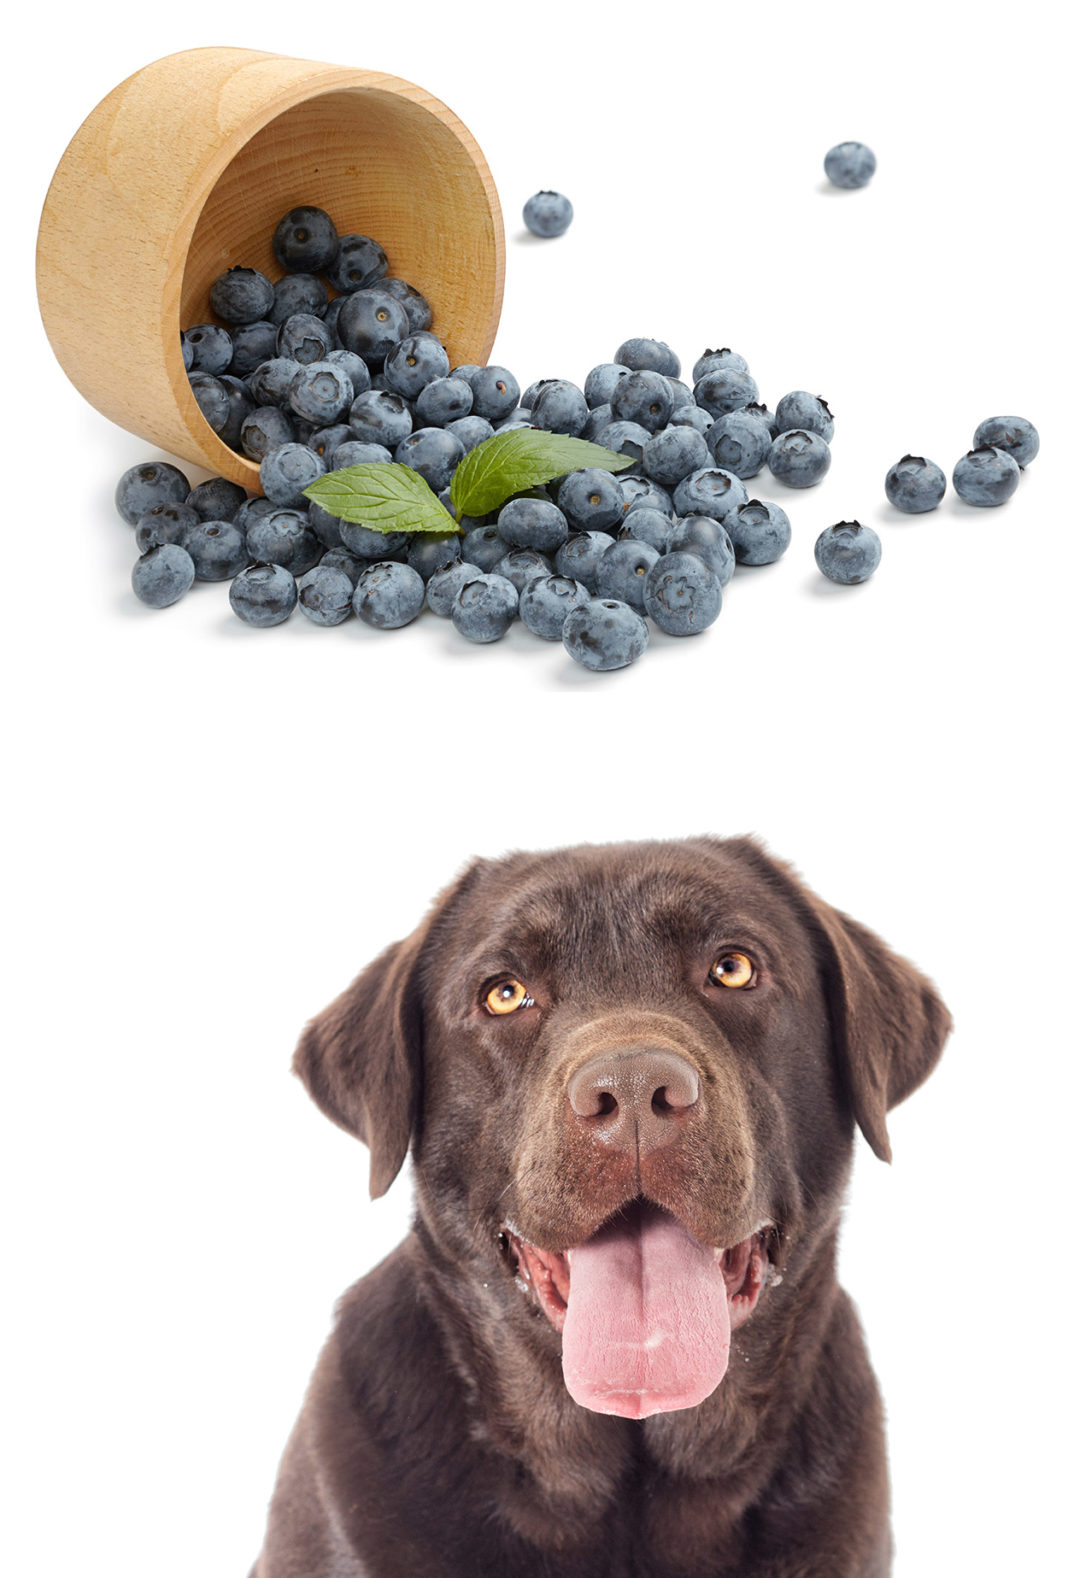 Can dogs eat bluberries